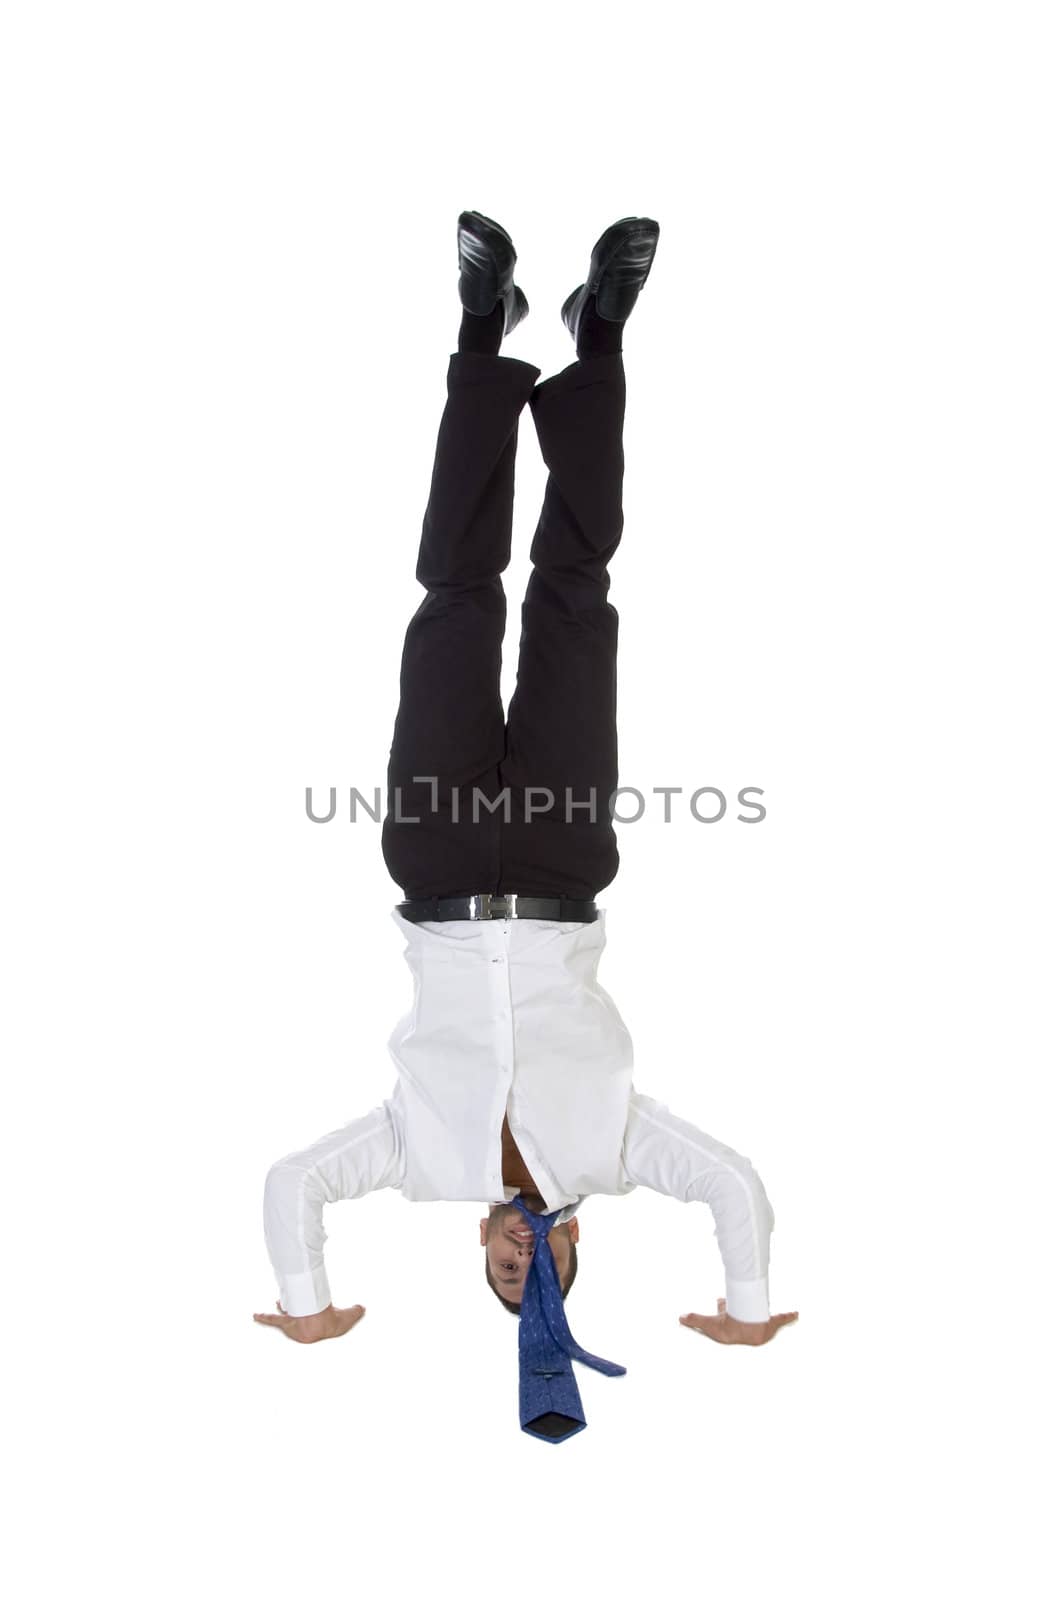 man doing topsy turvy by imagerymajestic